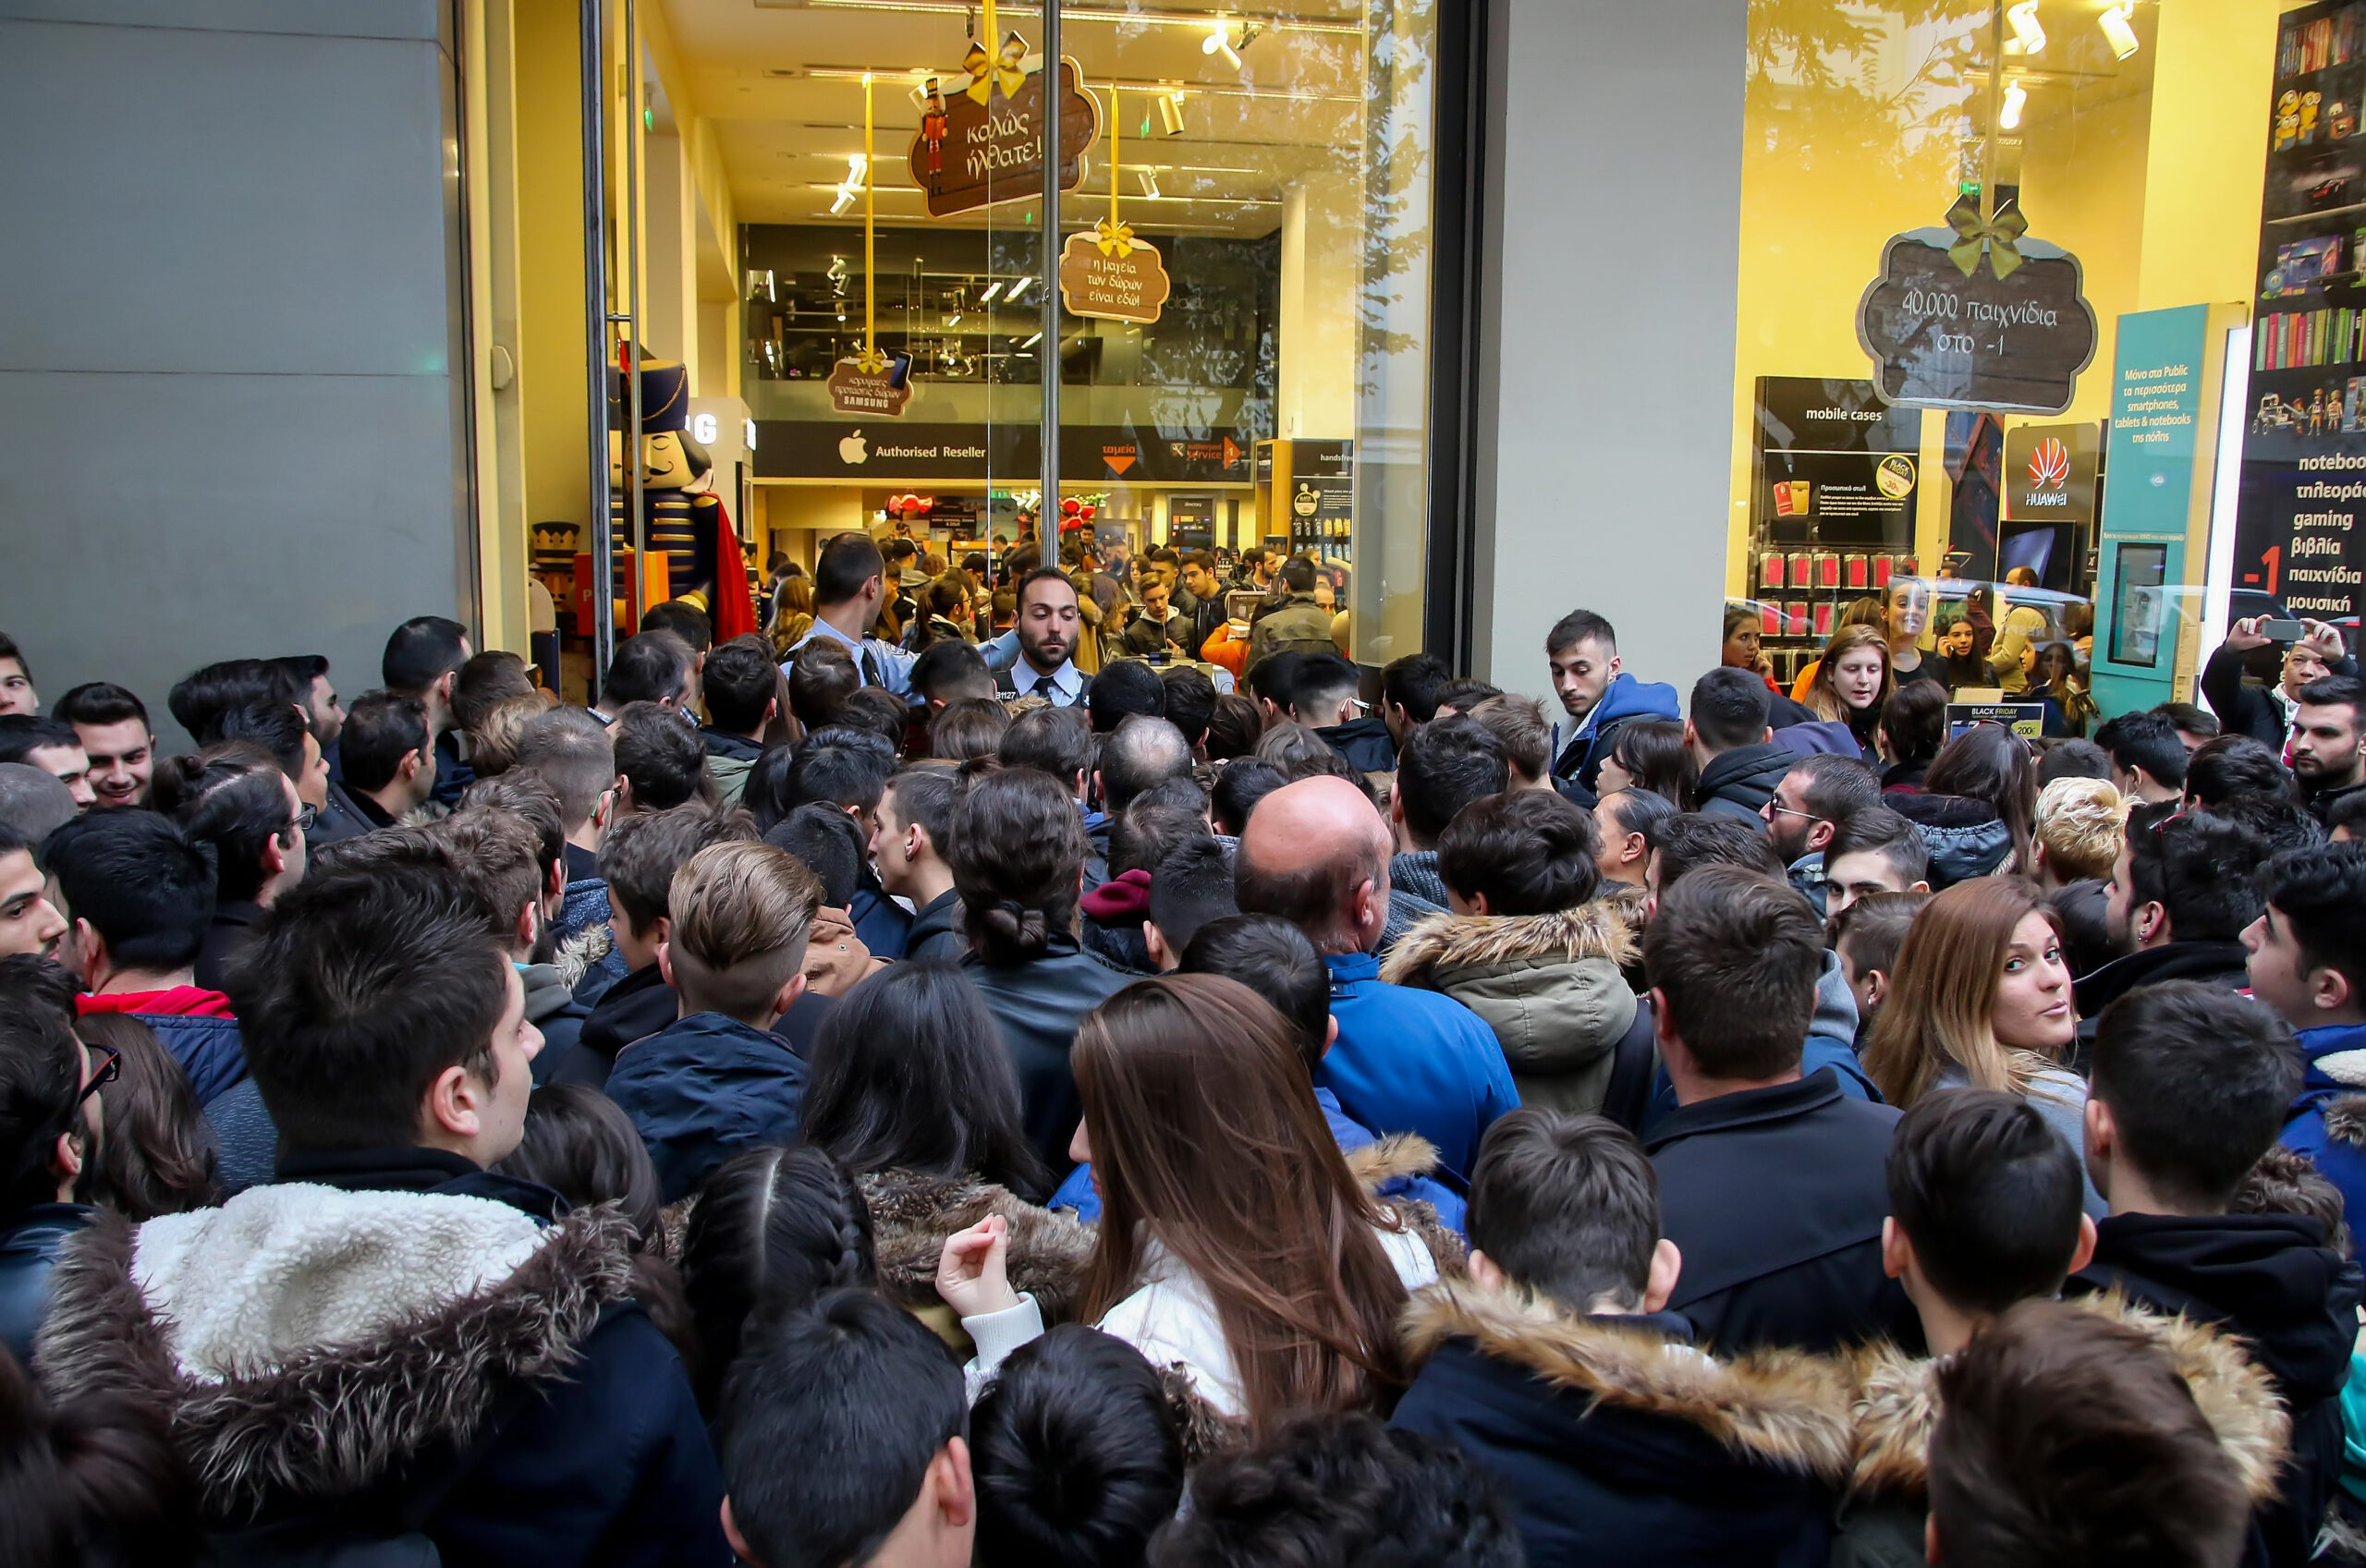 black friday shoppers trying to enter apple store but overcrowding front door